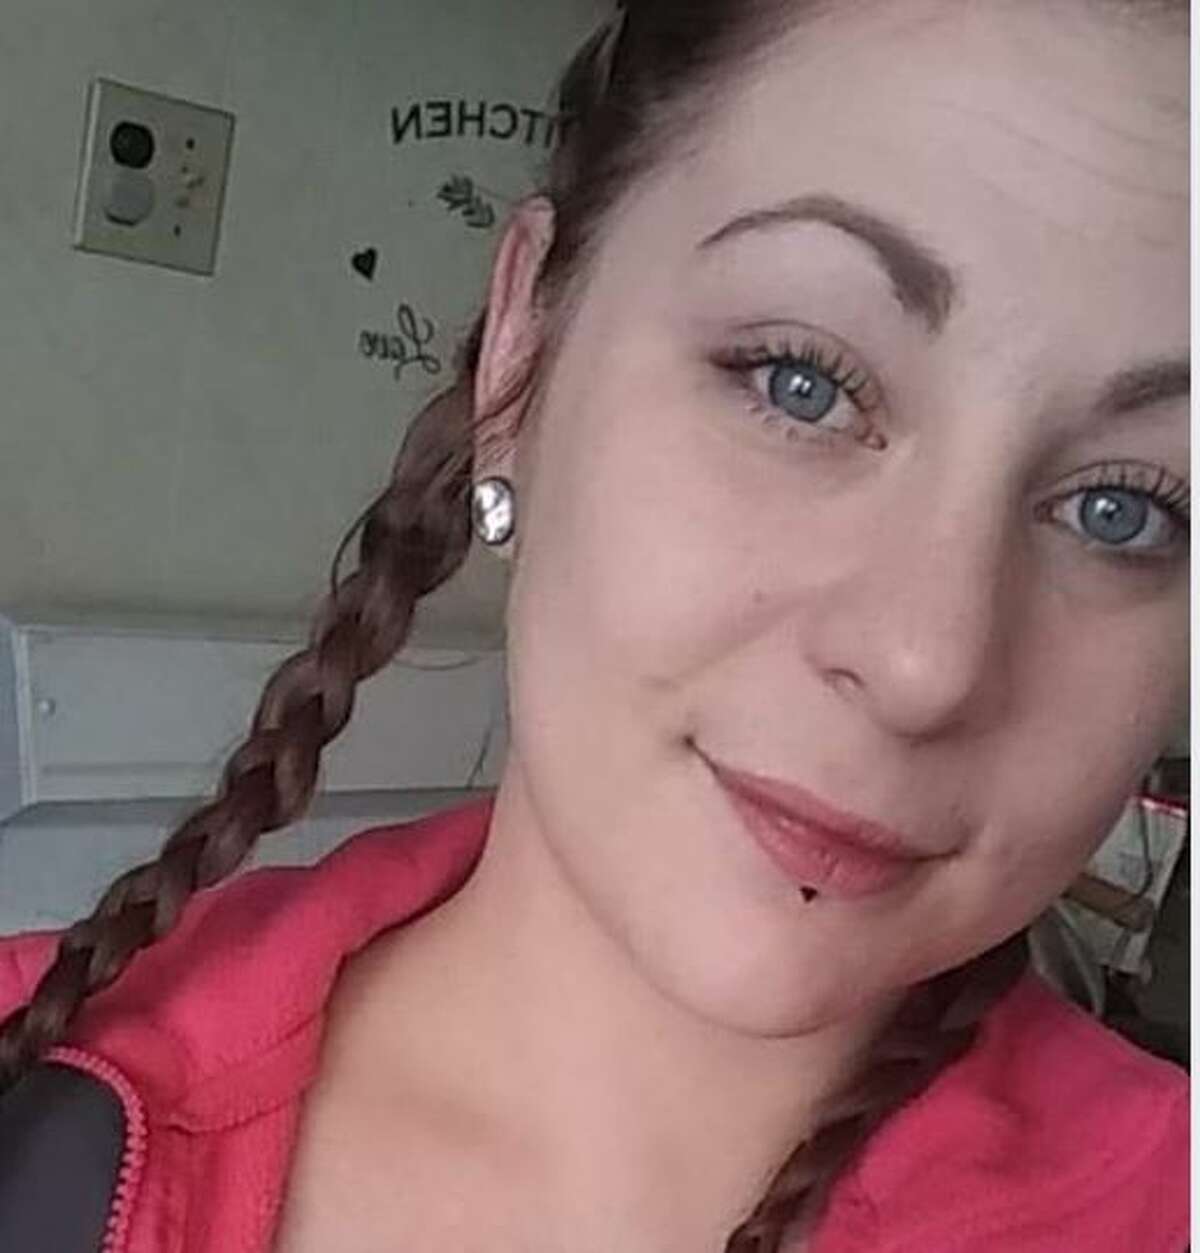 Police are searching for Allyzibeth A. Lamont, 22, who was last seen about 5 p.m. Monday, Oct 28, on Townsend Avenue in Johnstown.